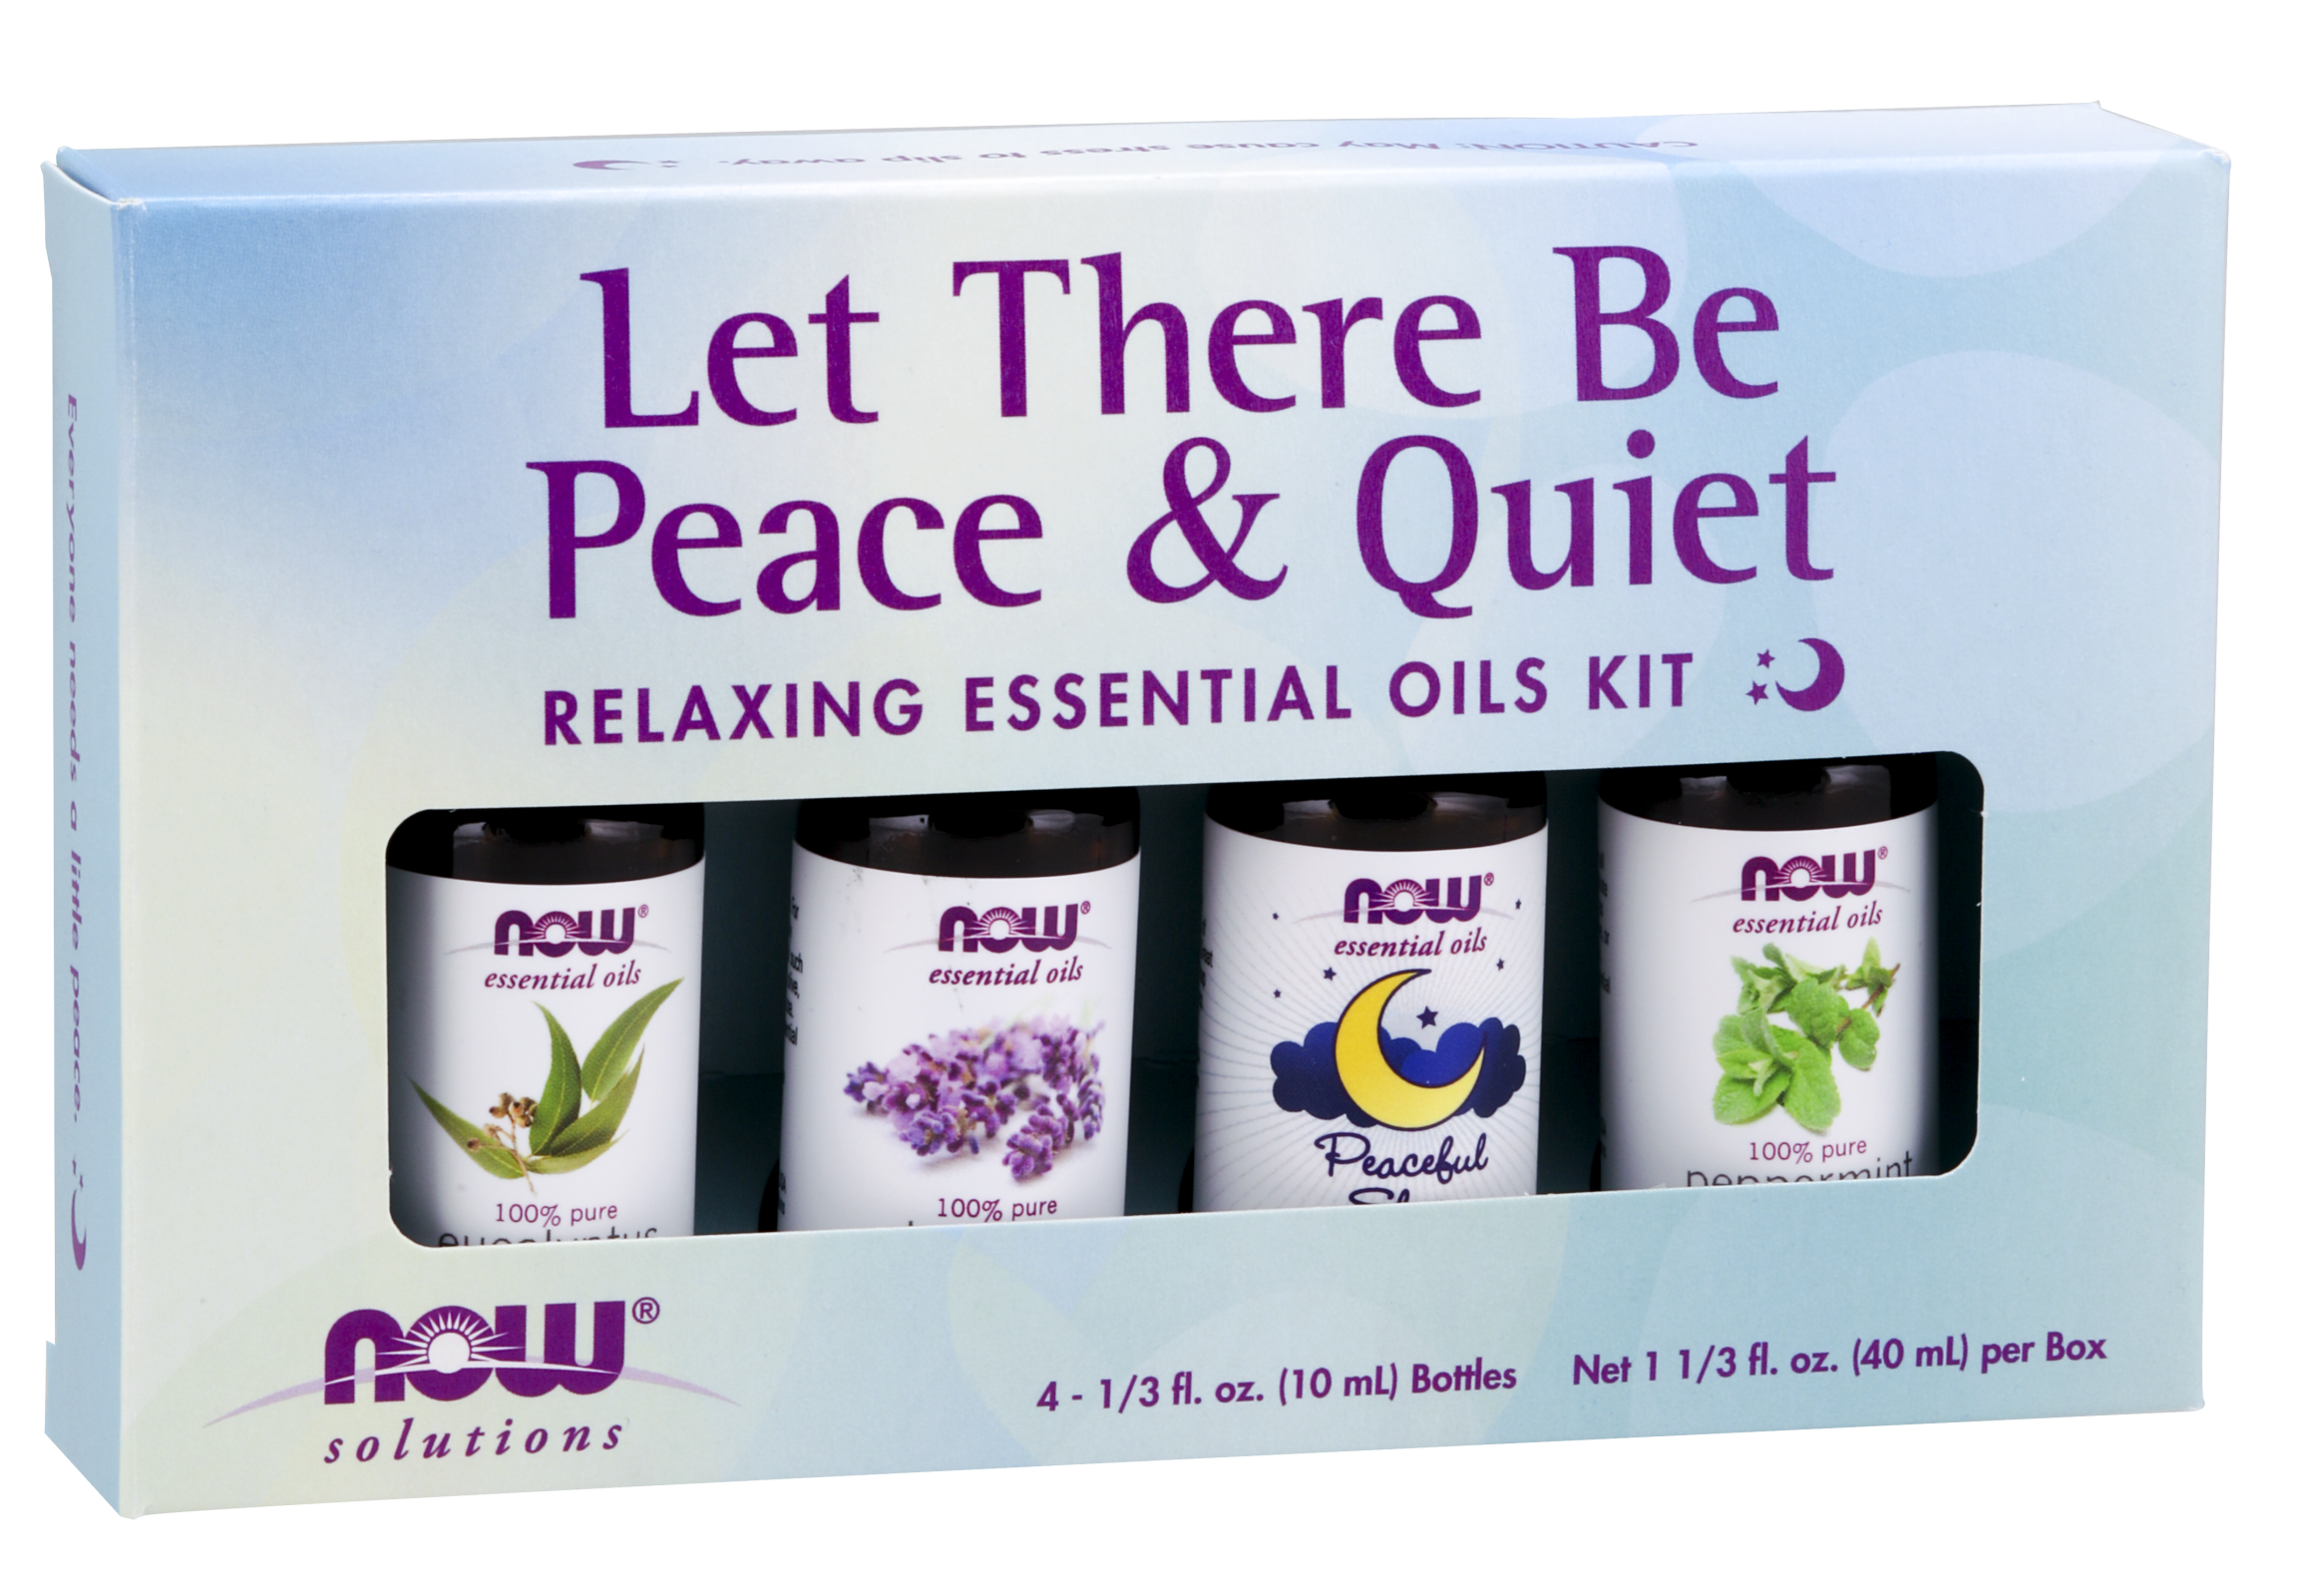 Let There Be Peace & Quiet Essential Oil Kit Box Front